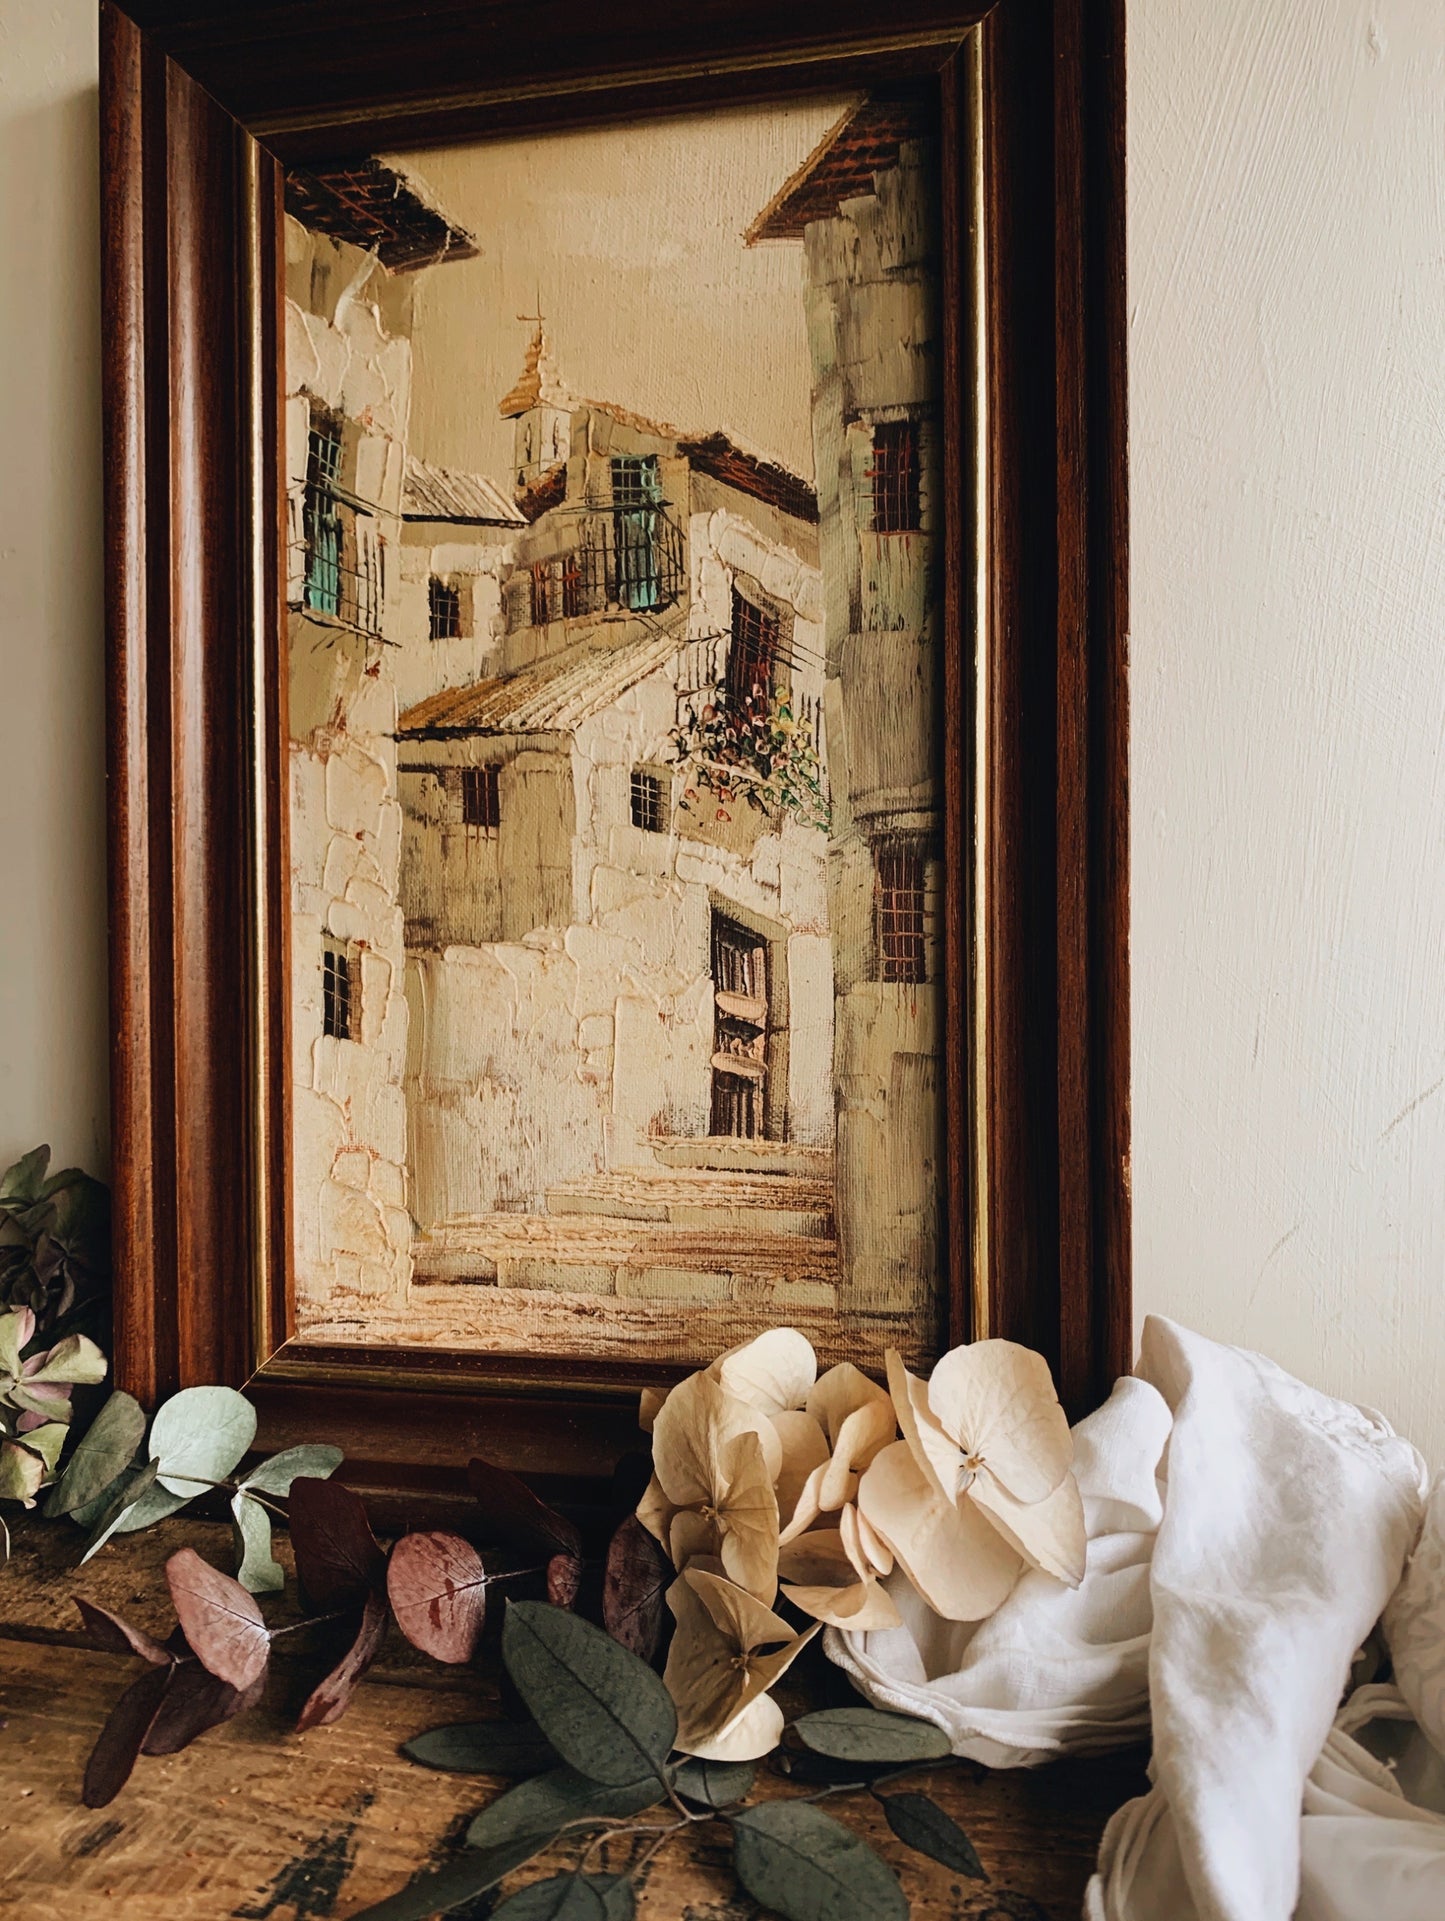 Rustic French (depicted town) Painting in Frame